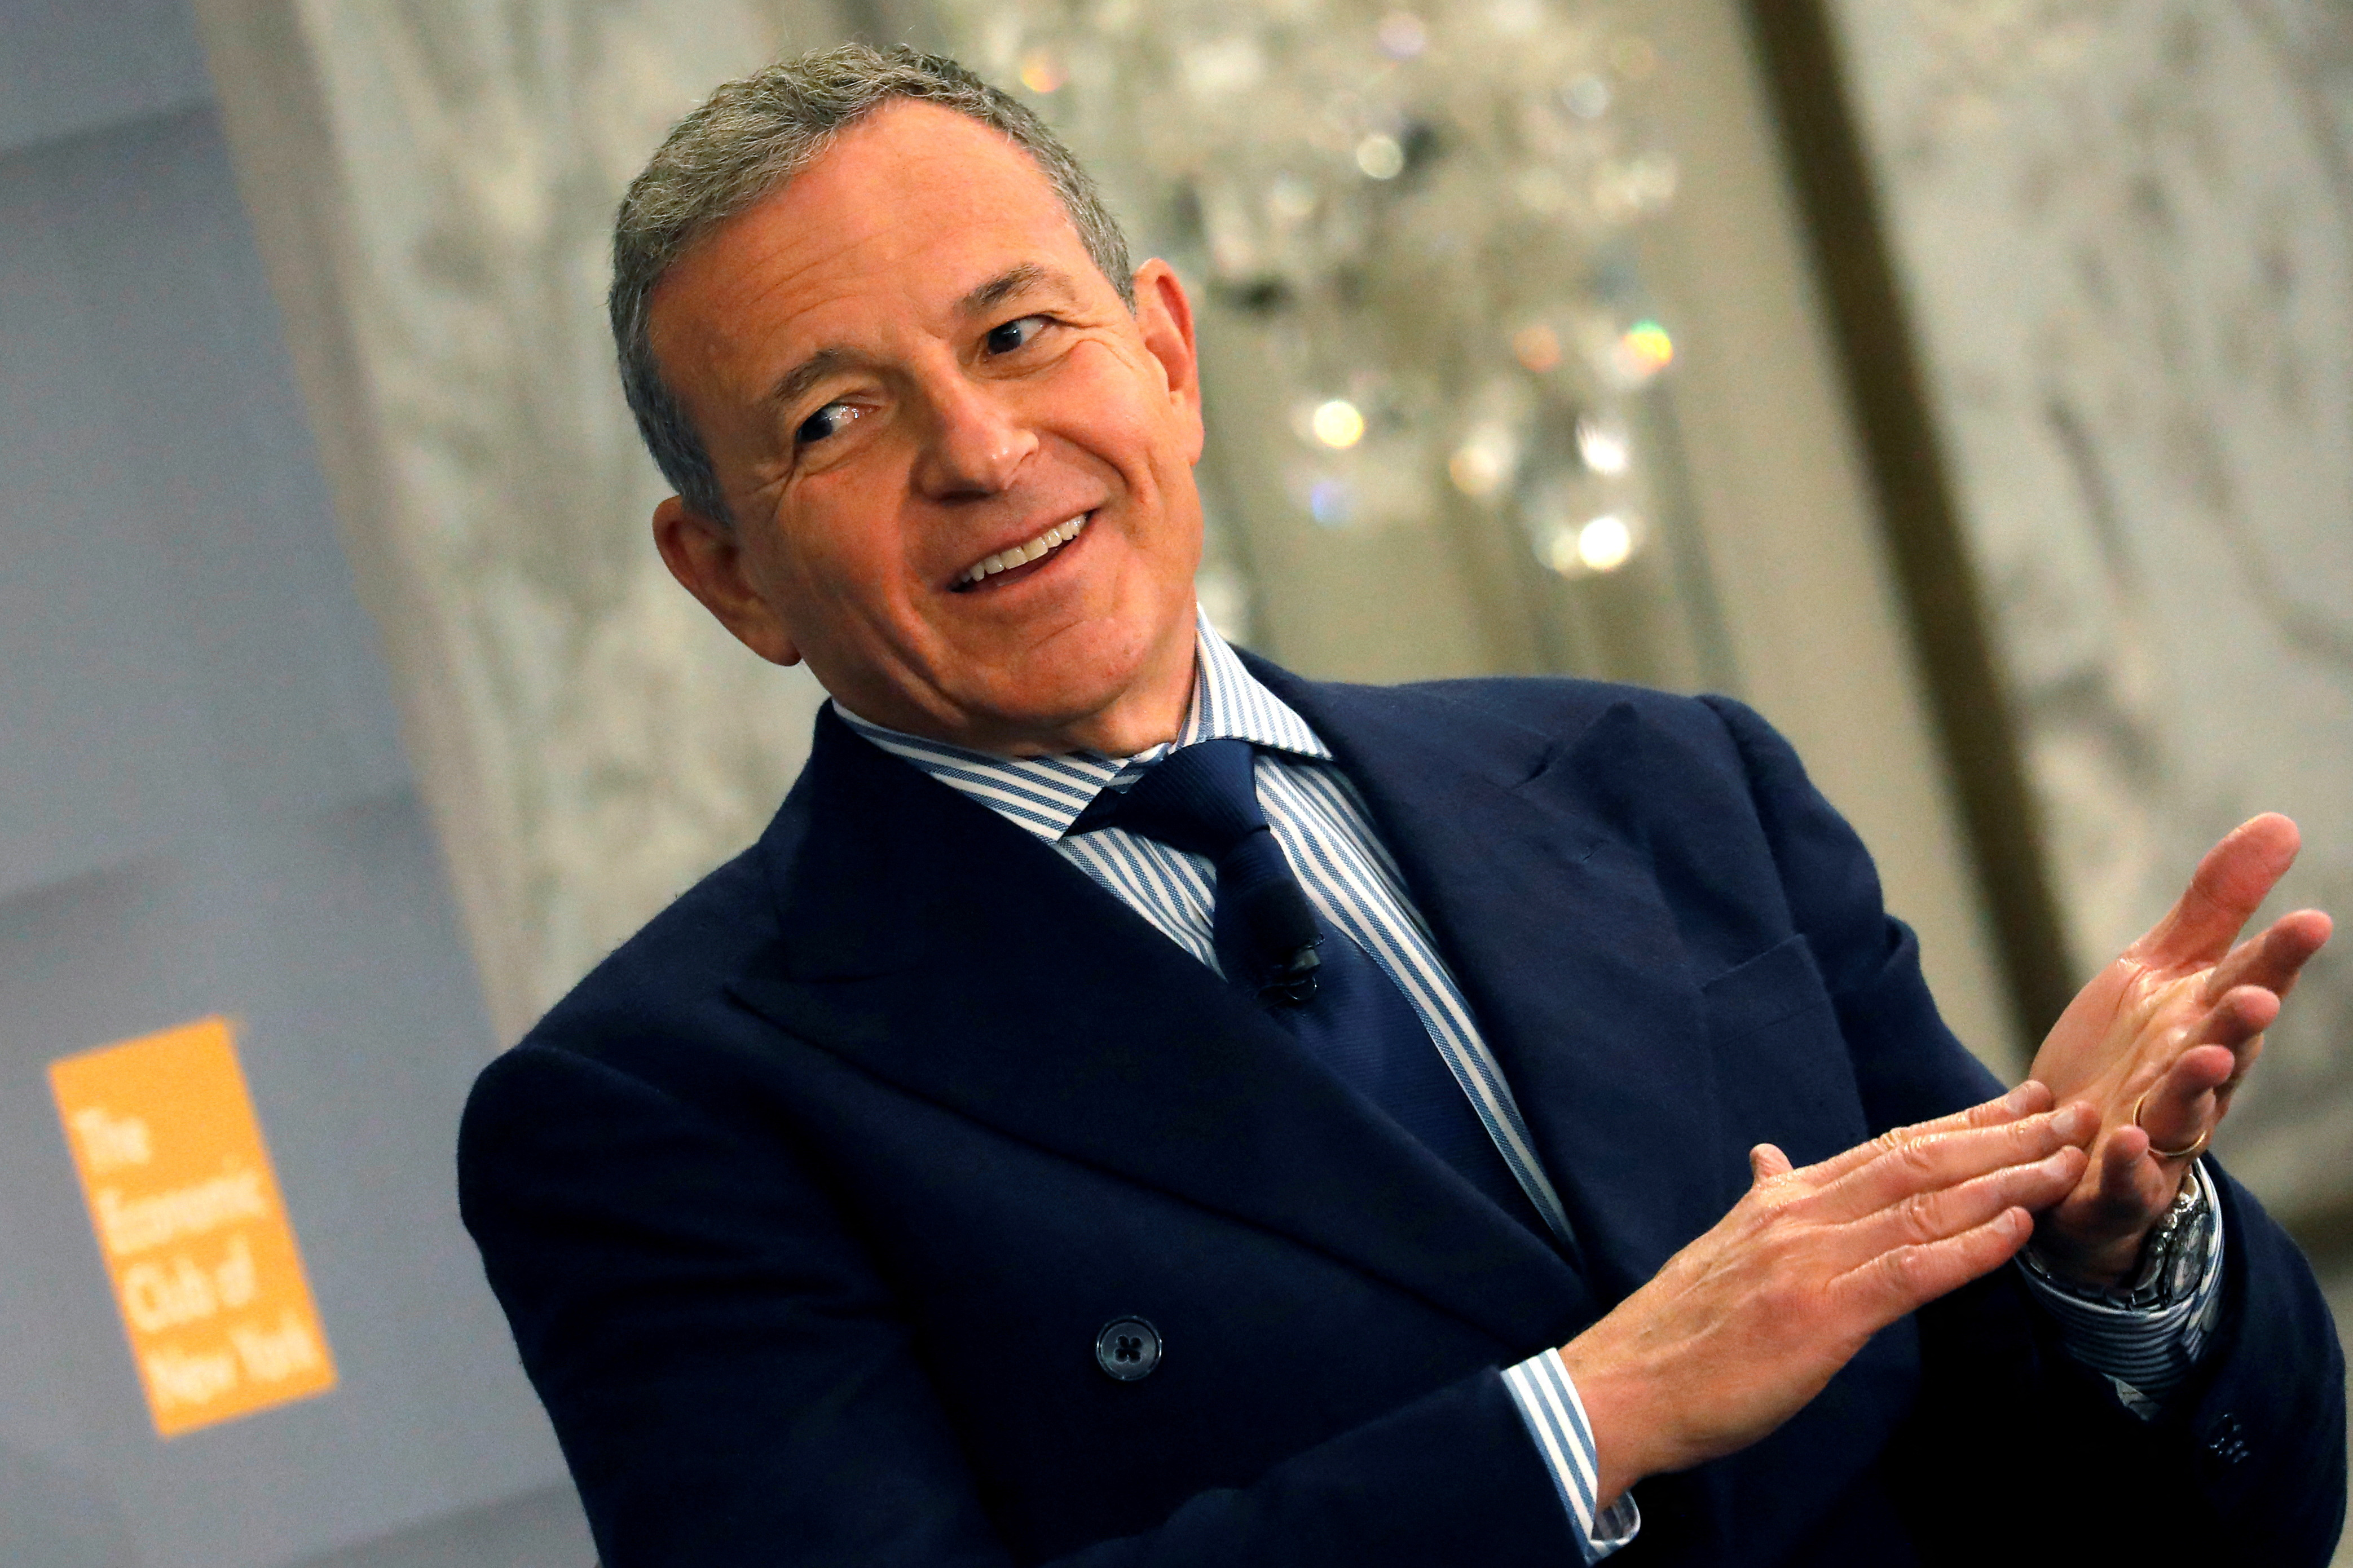 Robert Iger, Chairman and CEO at The Walt Disney Company speaks to the Economic Club of New York